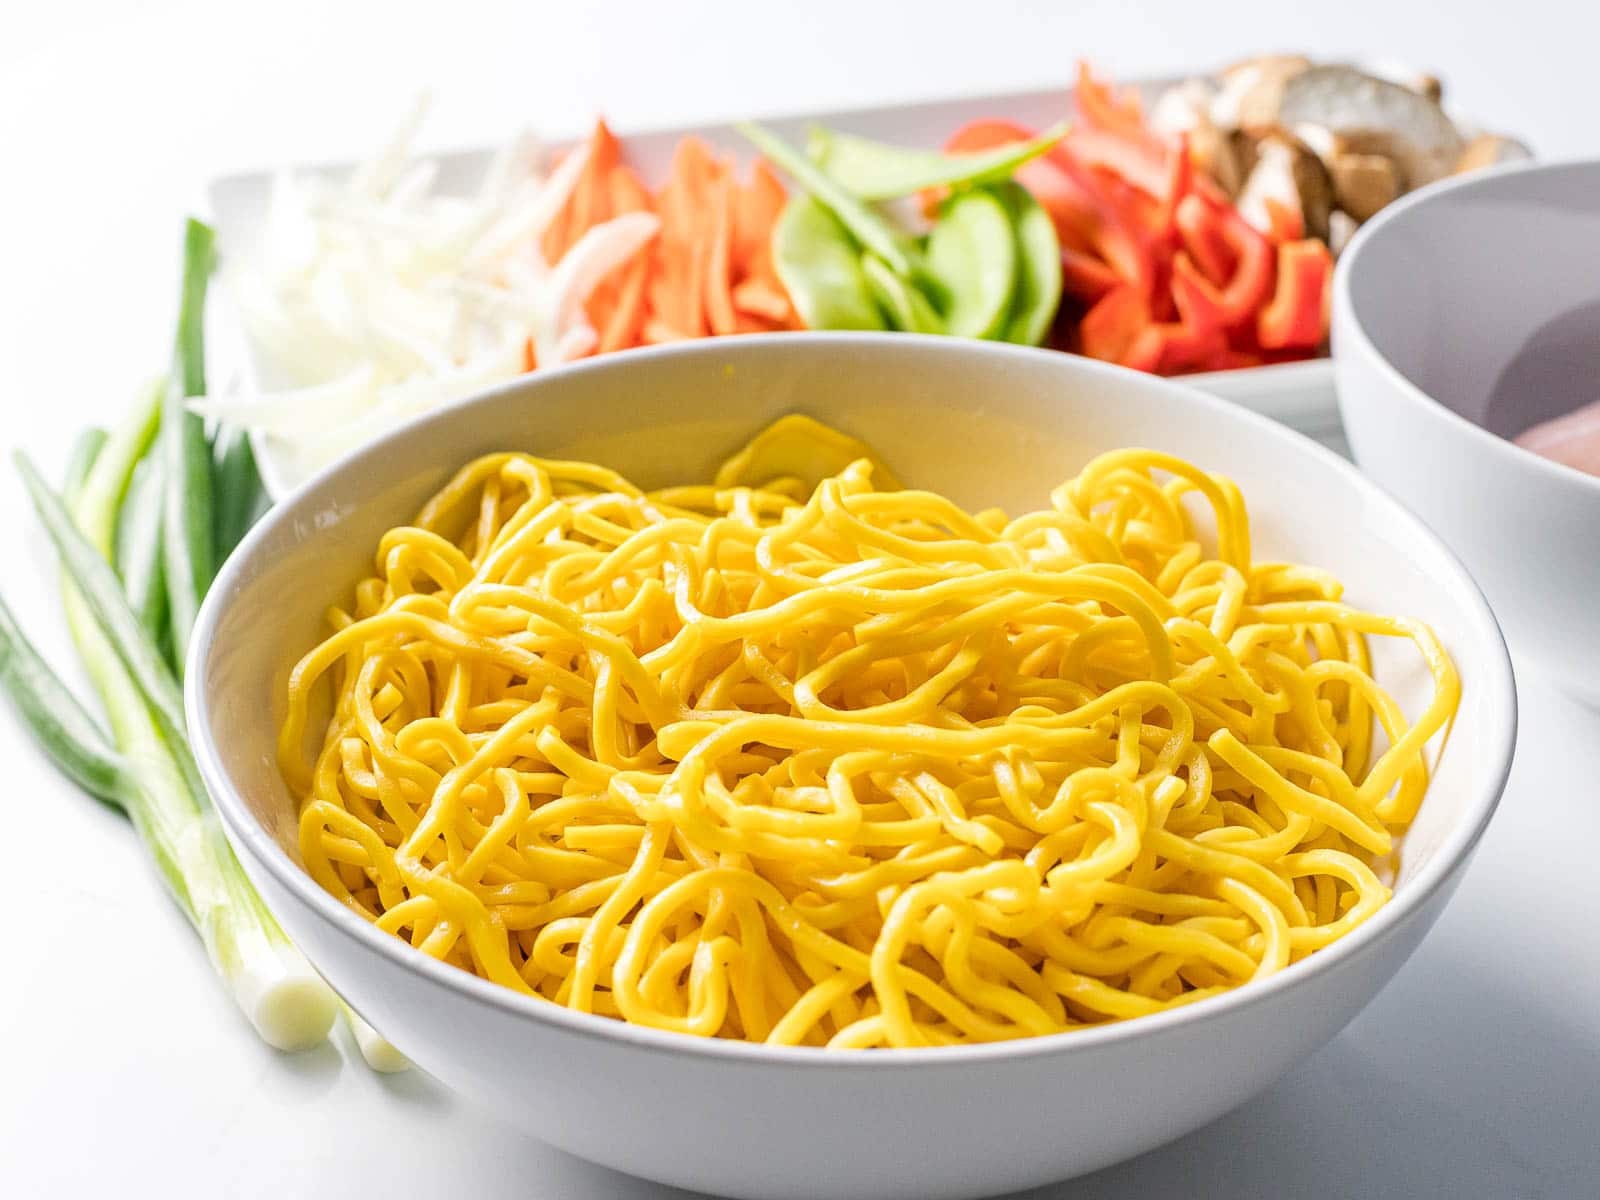 fresh Chinese egg noodles next to vegetables in a white bowl